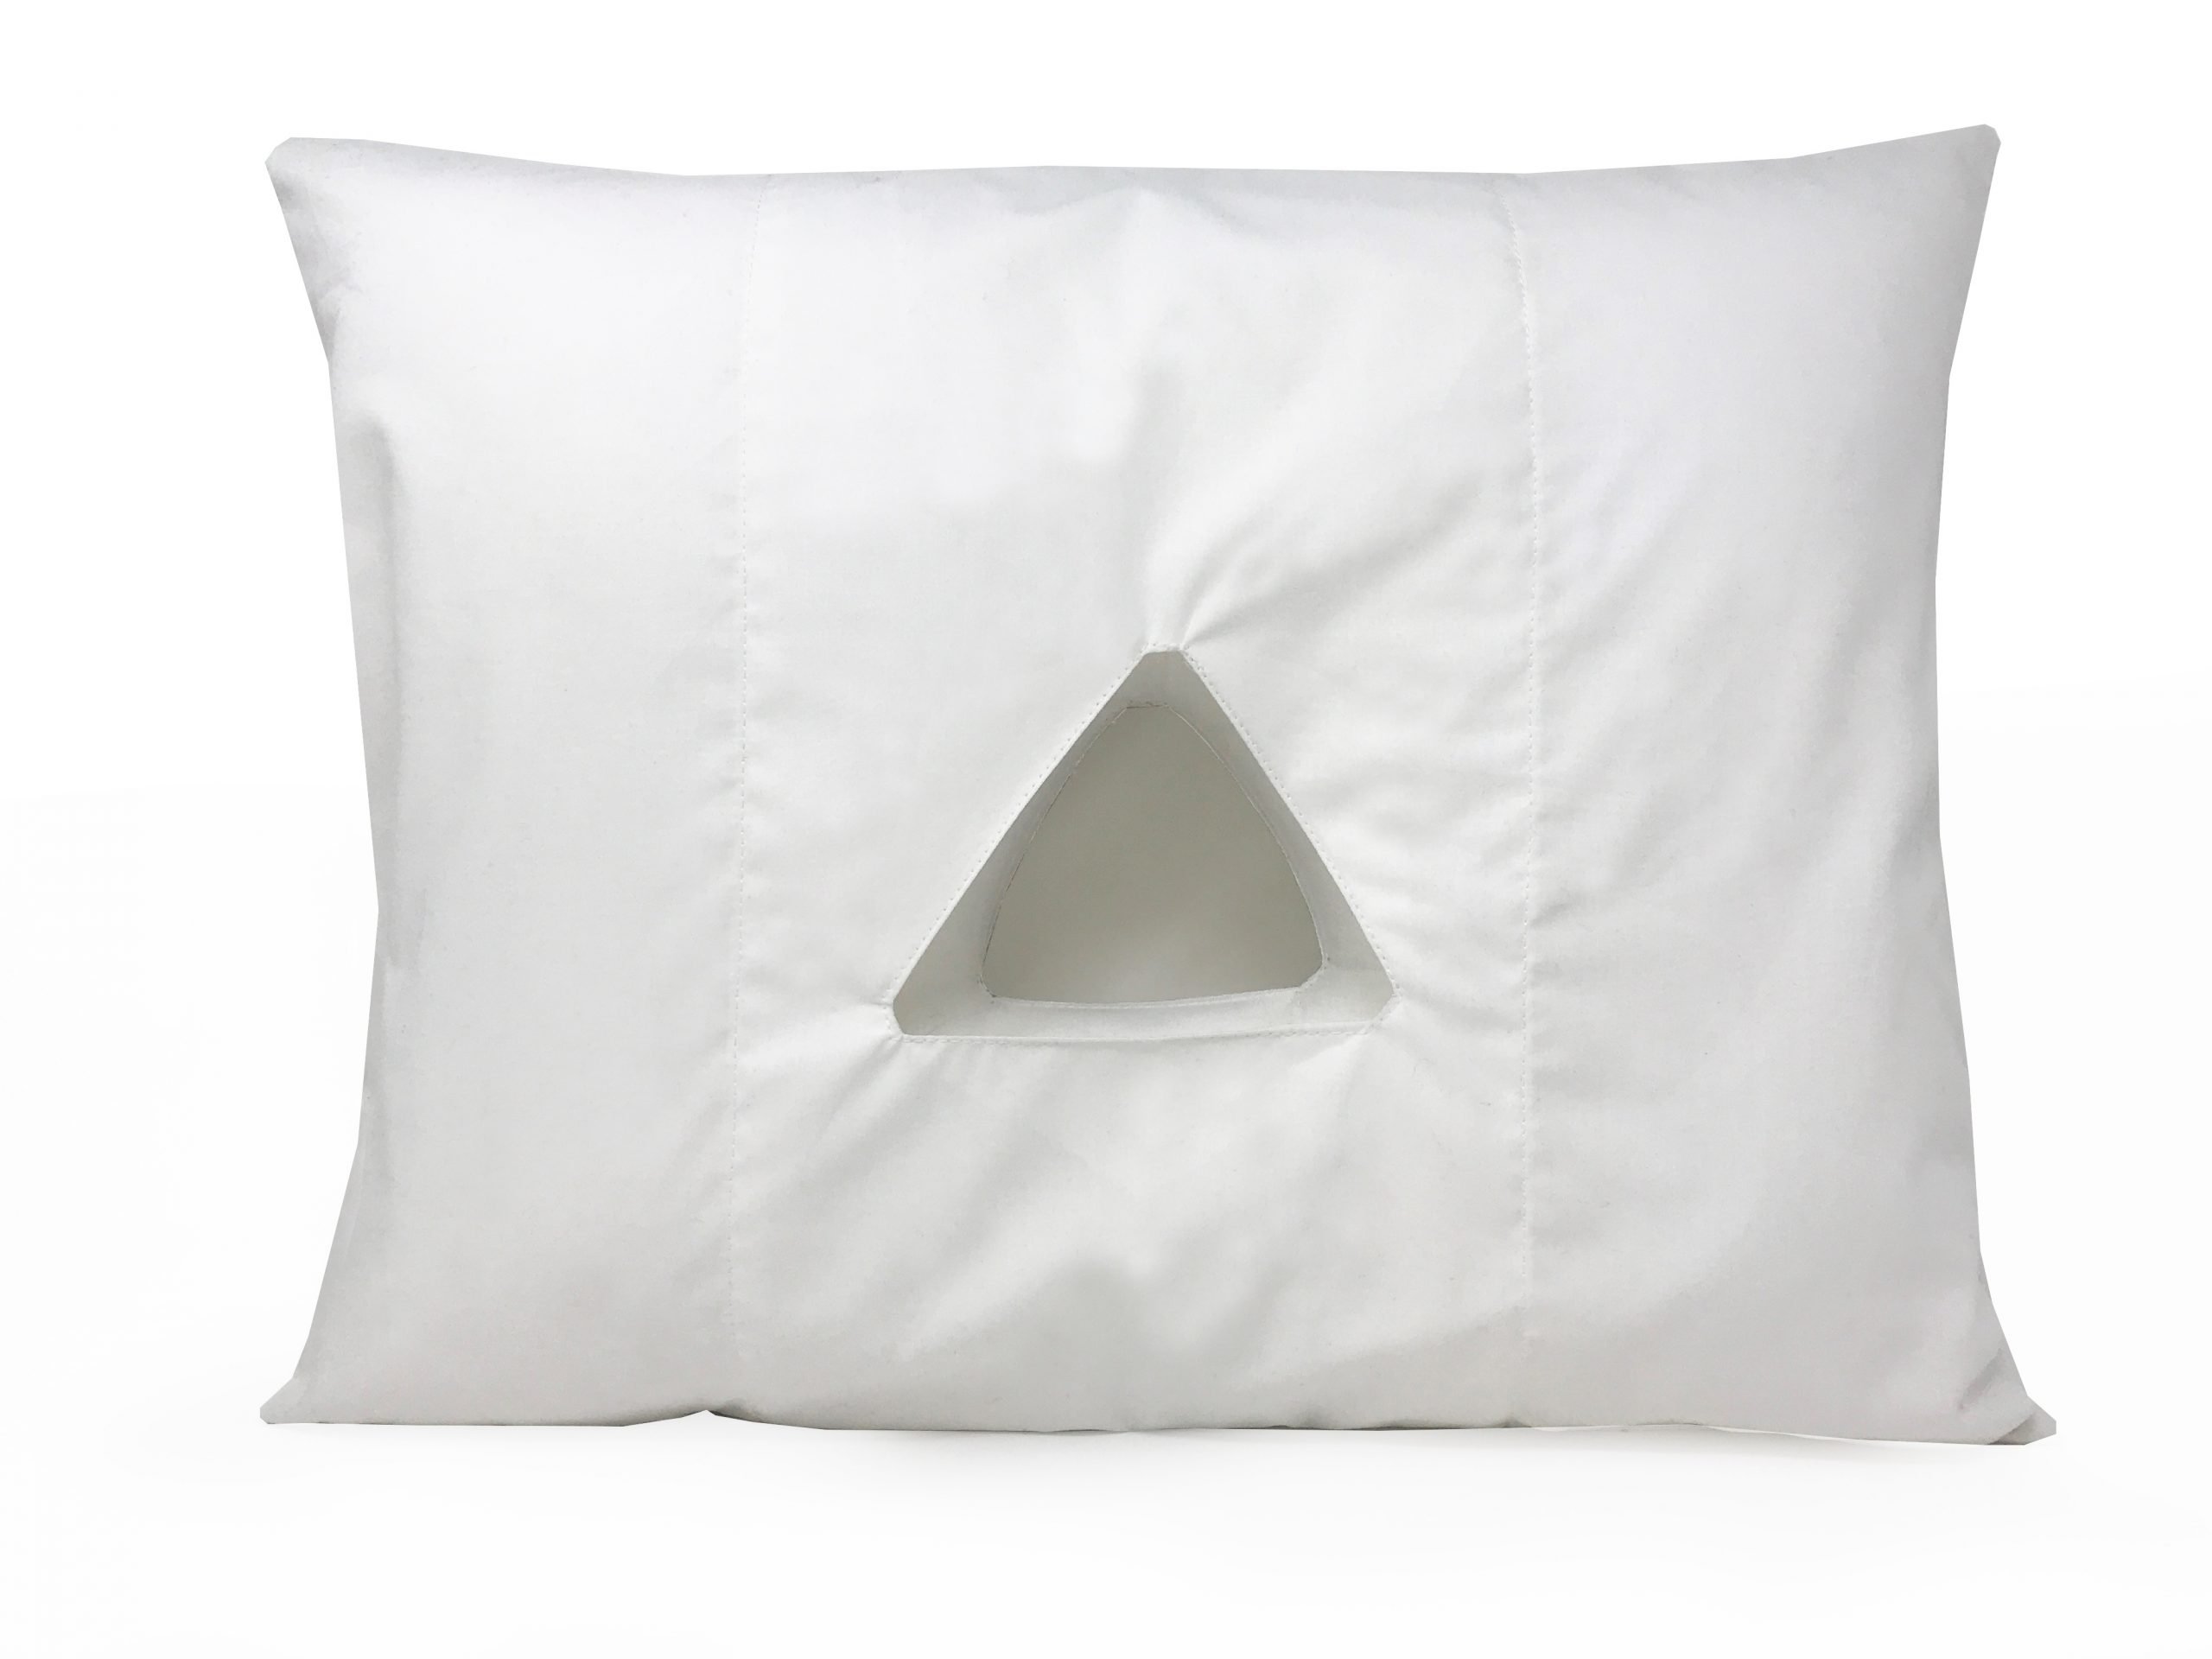 Improved Shape Ear Pillow with Hole (Or Pillowcase)